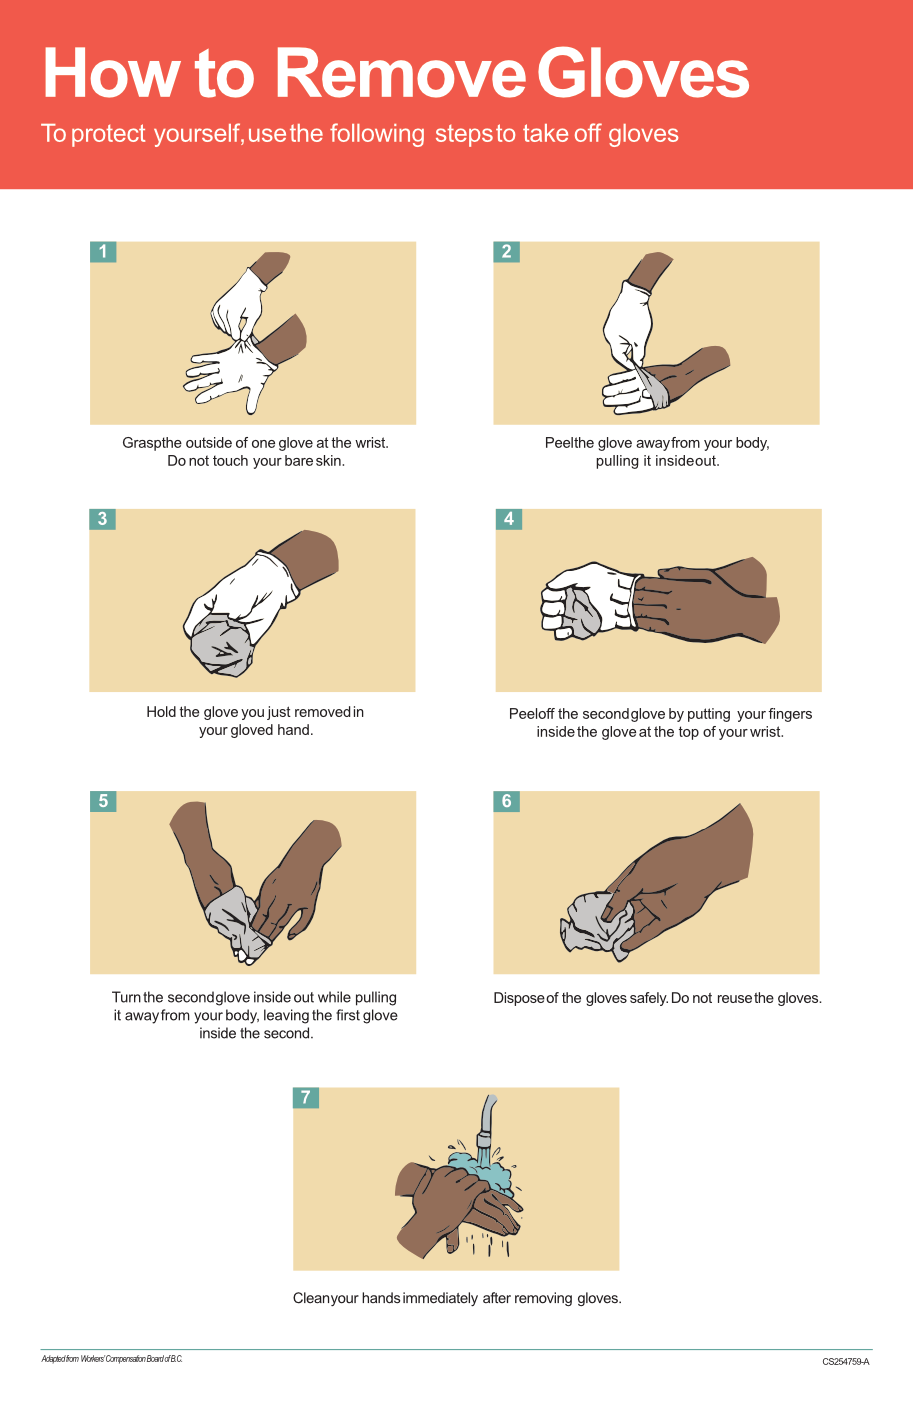 CDC Guide to Glove Removal